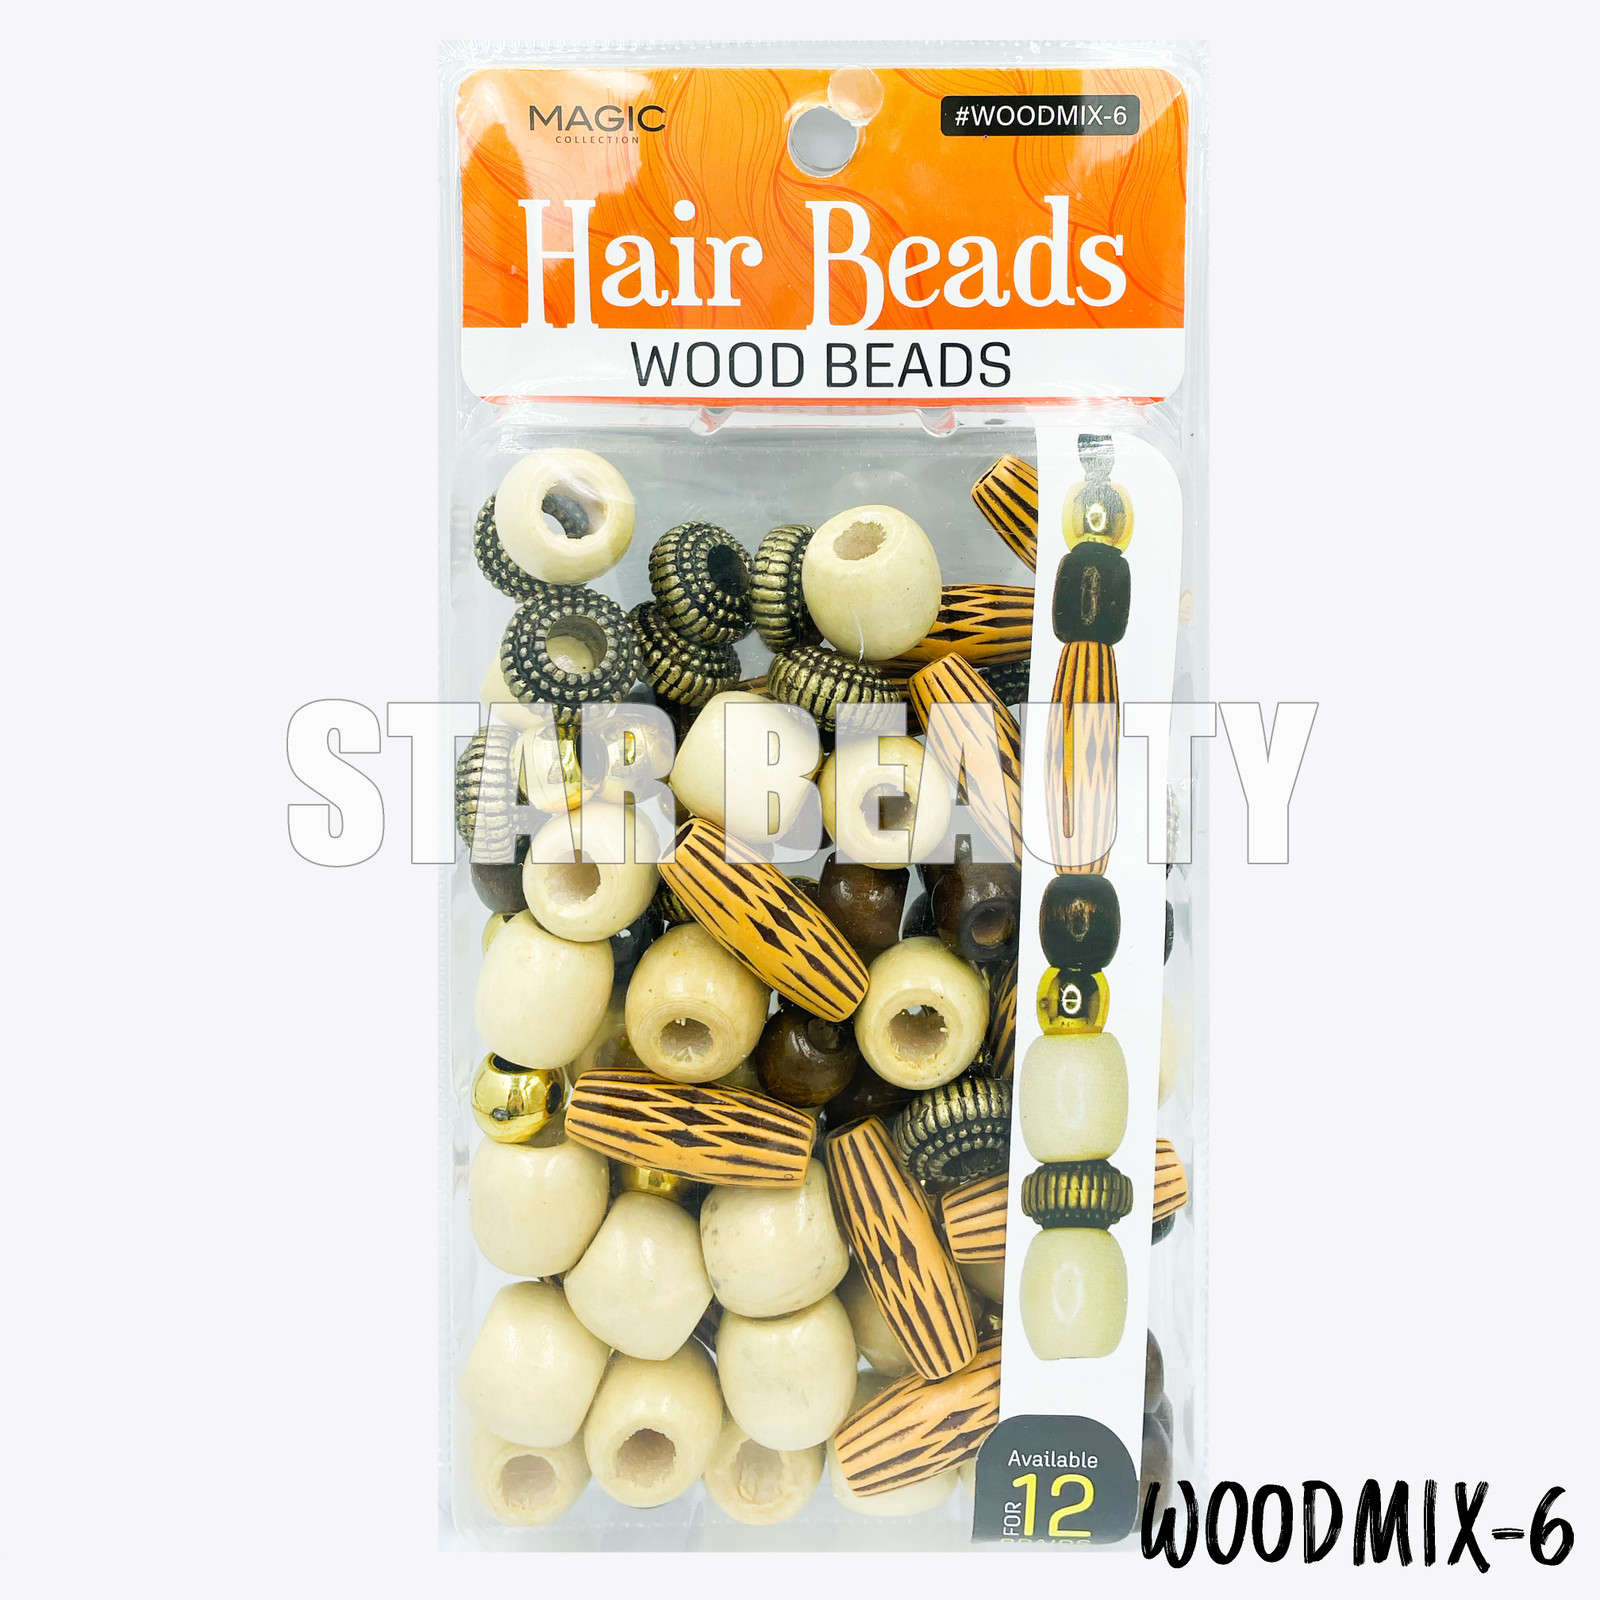 MAGIC COLLECTION Hair Beads